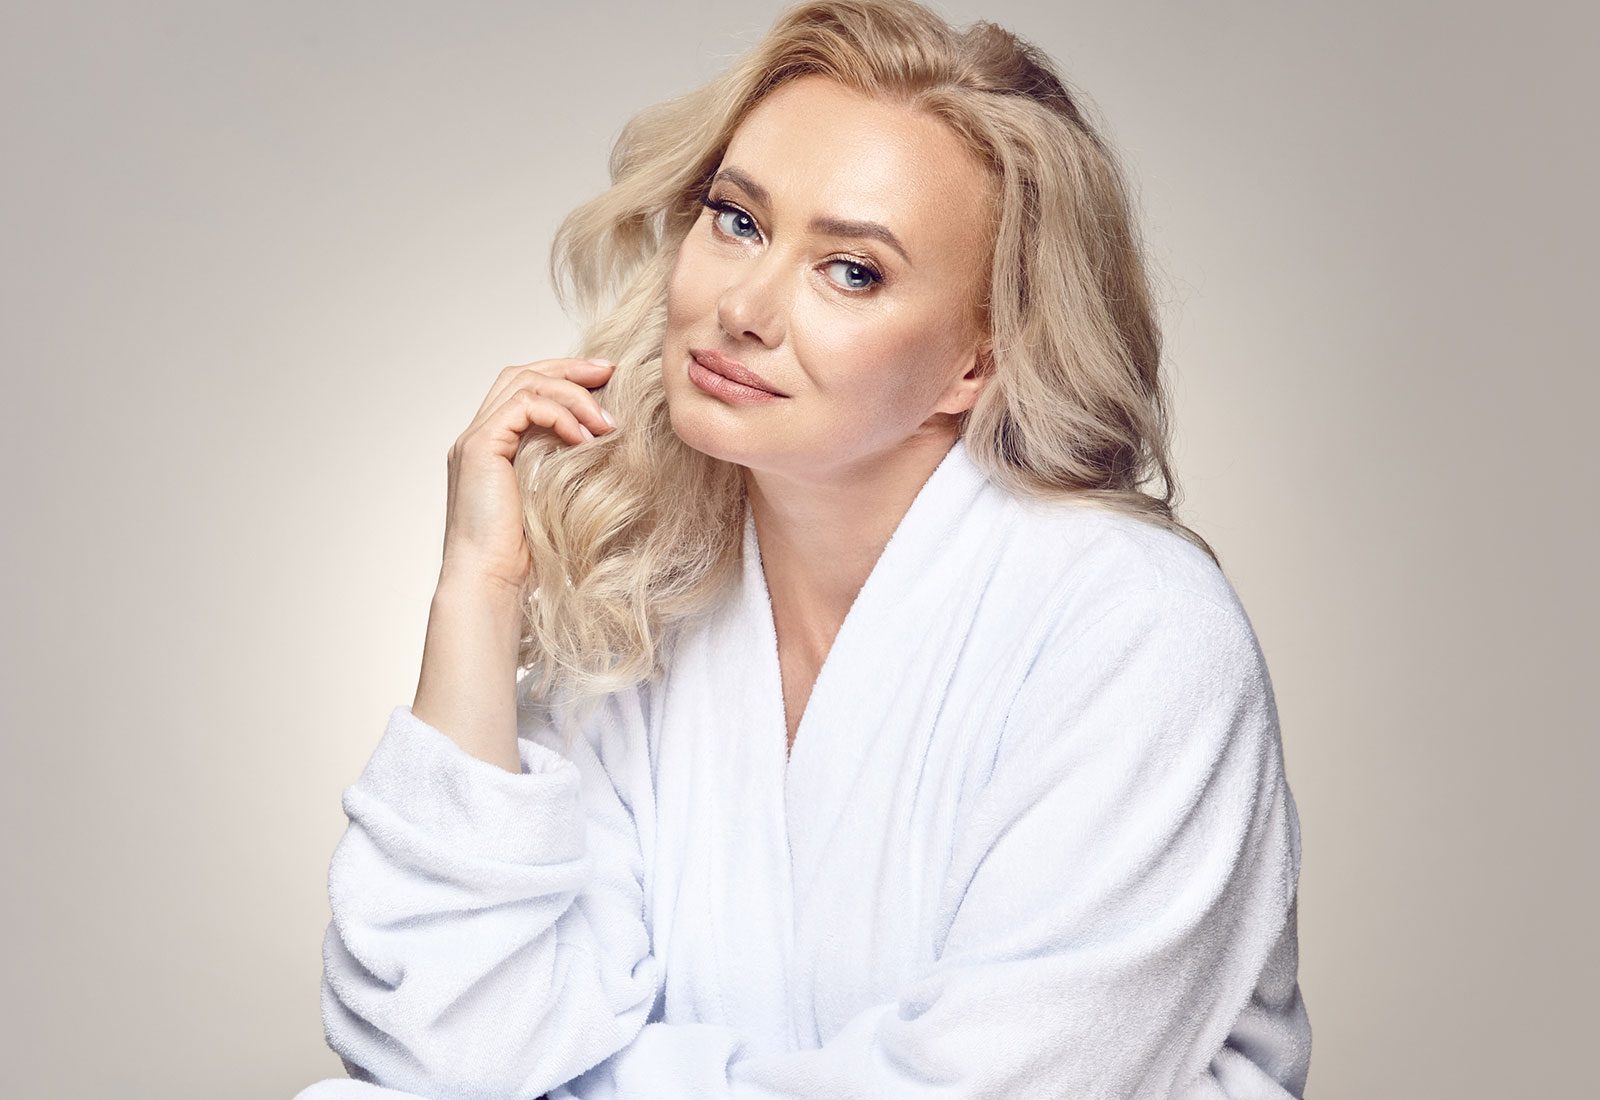 Blonde woman with defined cheekbones wearing a white robe